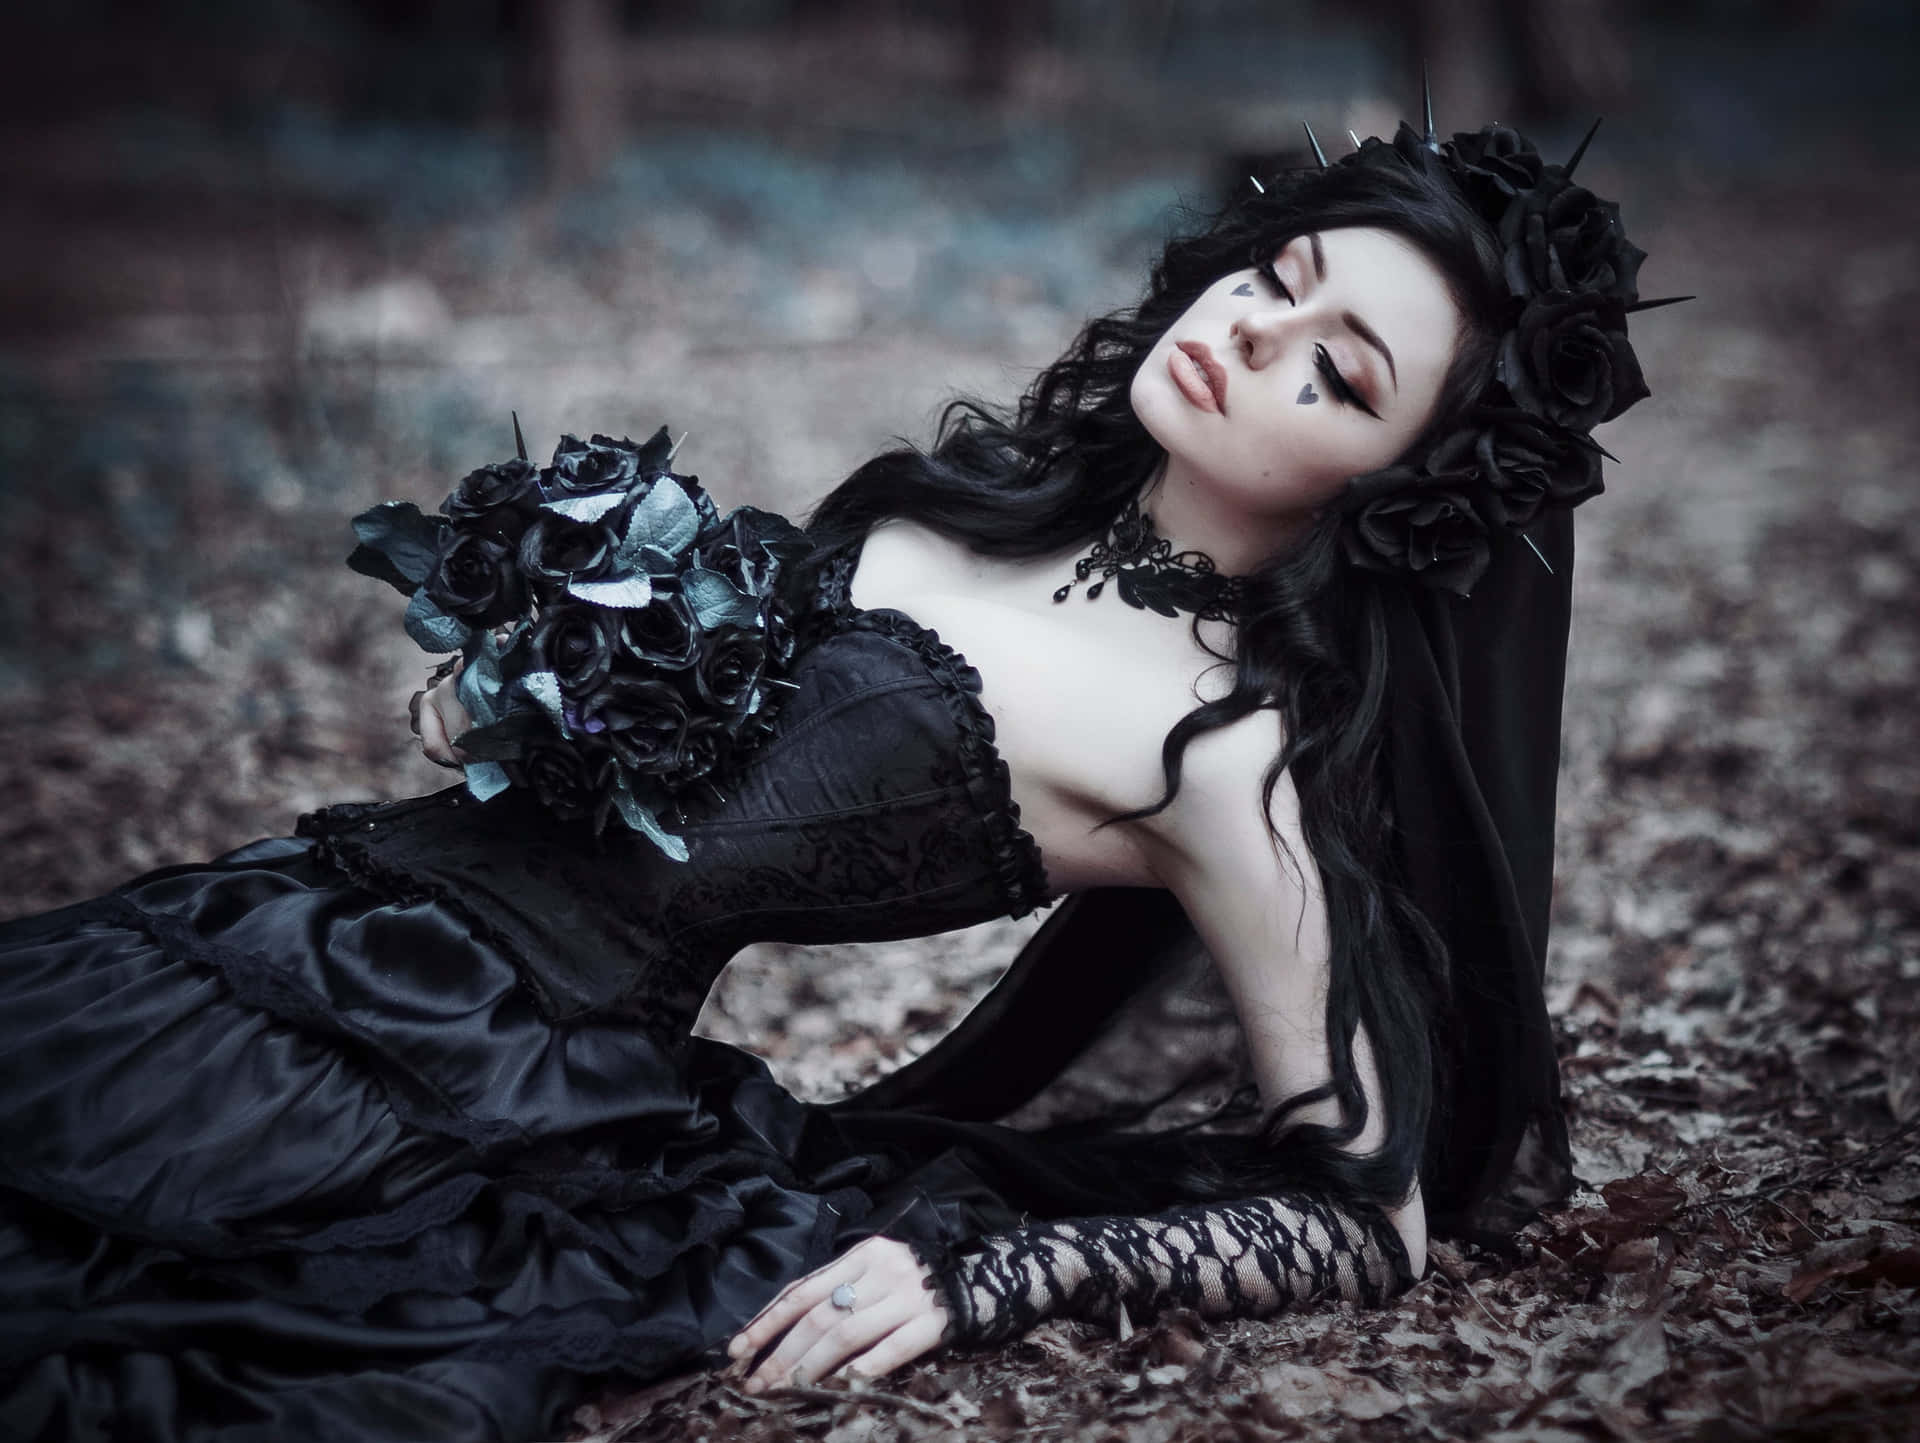 Captivating Gothic Costume and Makeup Wallpaper